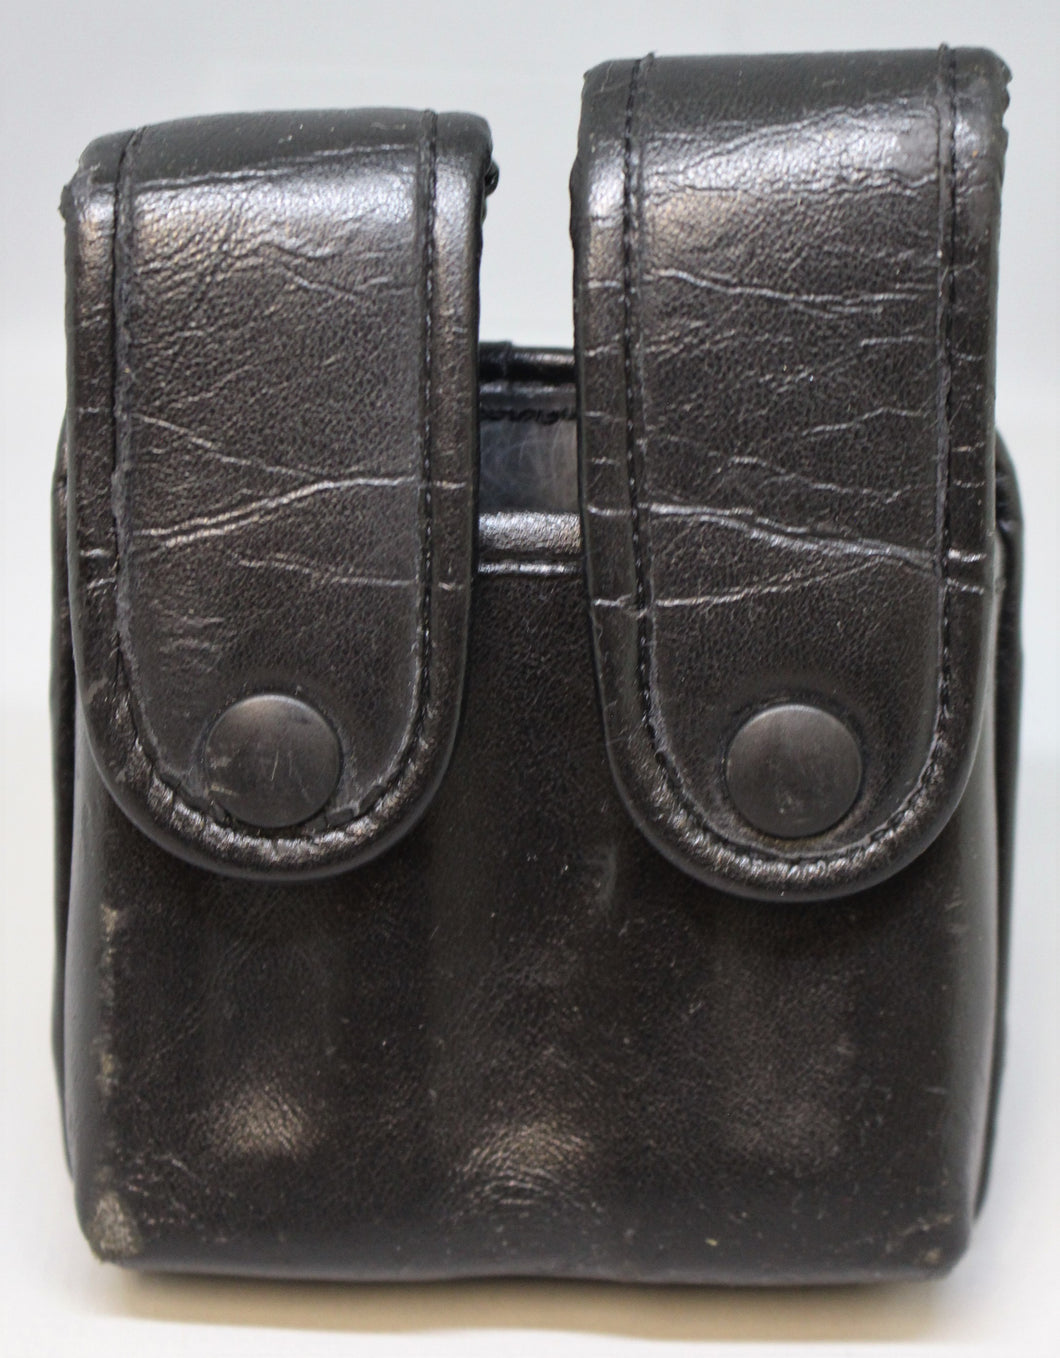 Uncle Mike's Double Mag Pouch - Sidekick - Leather - Used